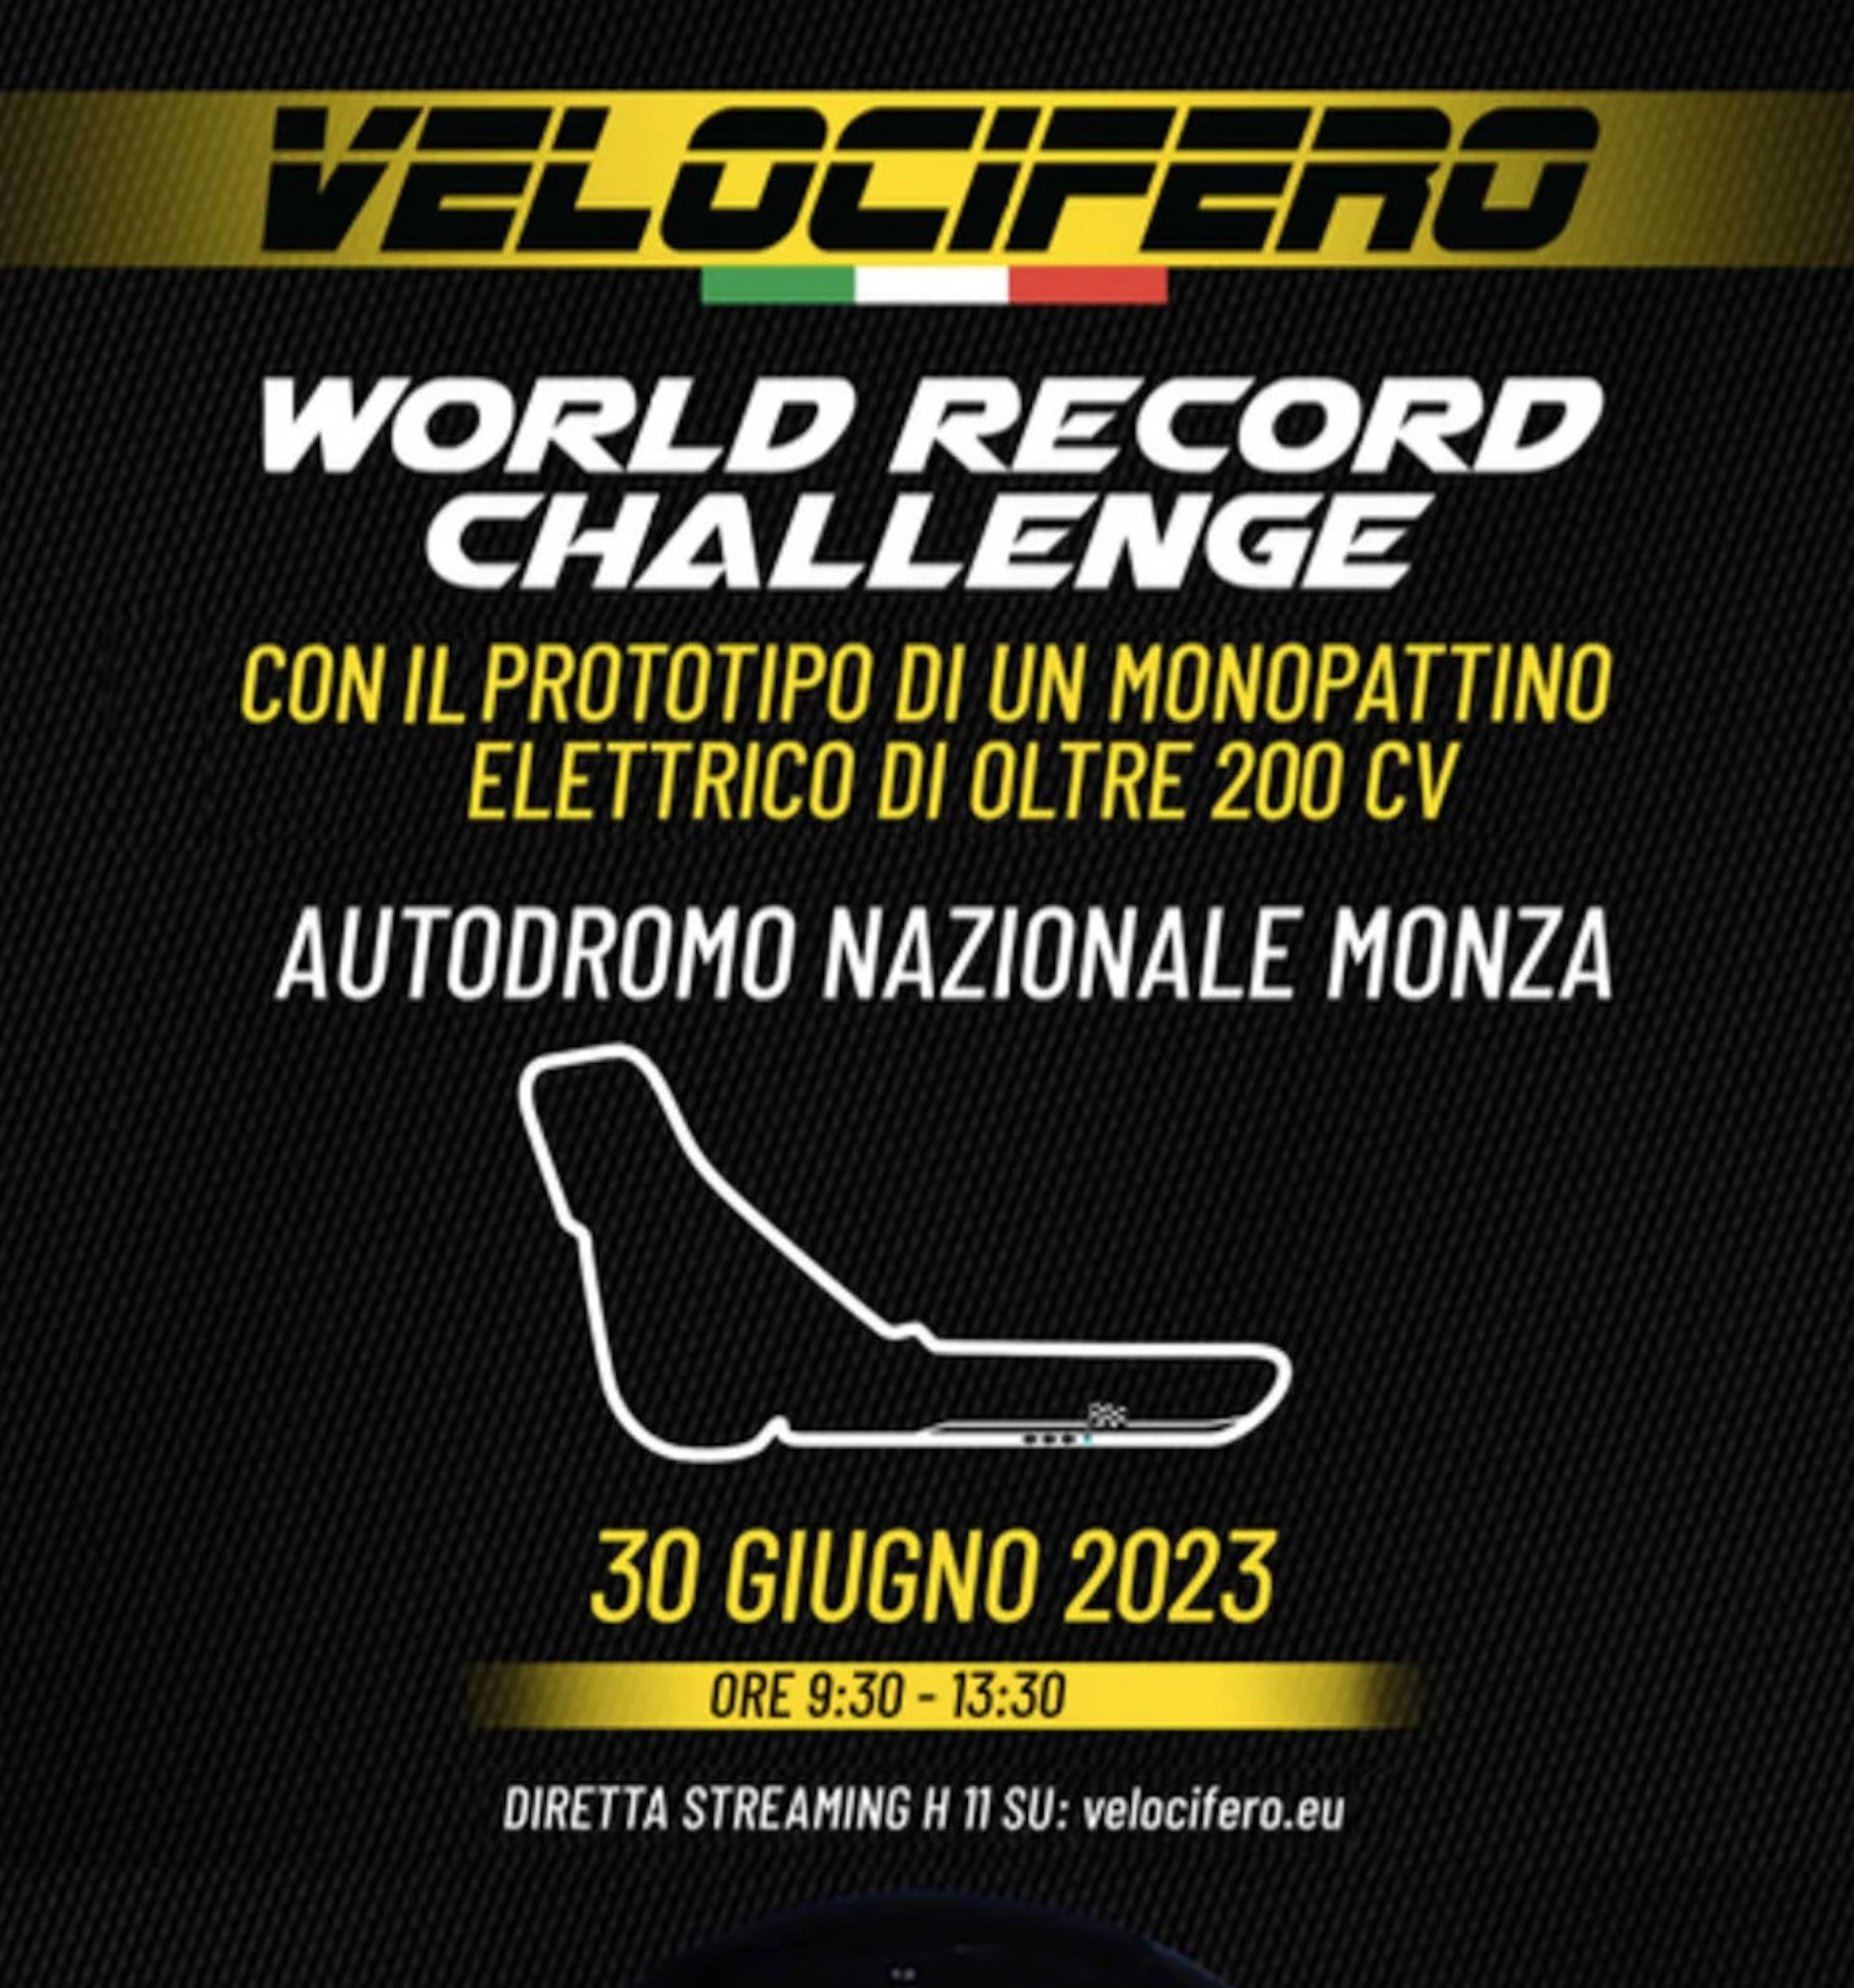 Velocifero's poster showing the day, date and time of the upcoming world speed record attempt. Media sourced from Velocifero's website.